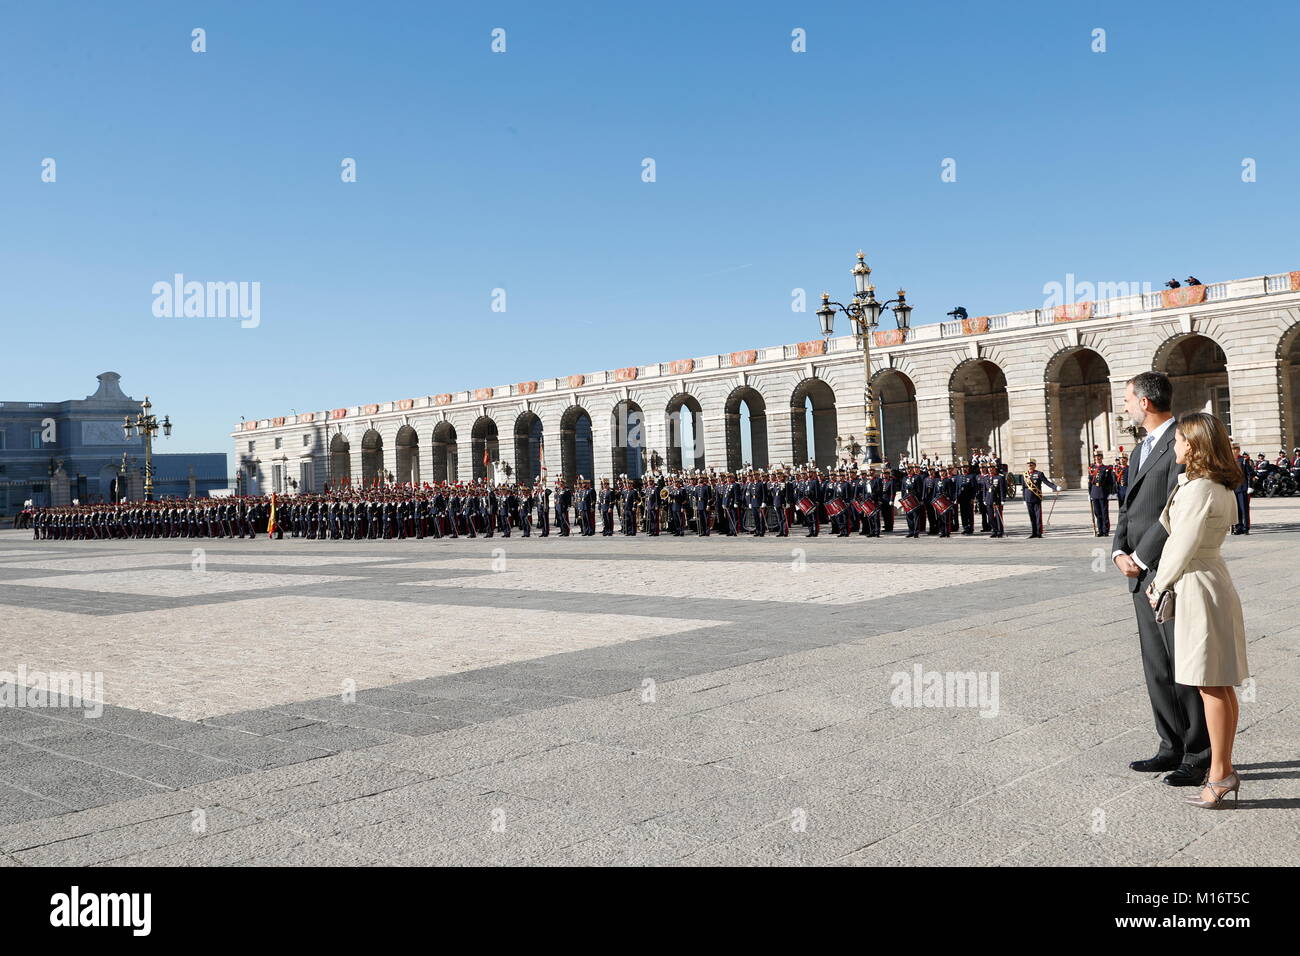 Spanish King Felipe VI and Queen Letizia during a wellcome ceremony for Israel's President on ocassion his official visit to Spain in RealPalace, Madrid on Monday 06, November 2017 © Casa de Su Majestad el Rey Credit: Gtres Información más Comuniación on line, S.L./Alamy Live News Stock Photo